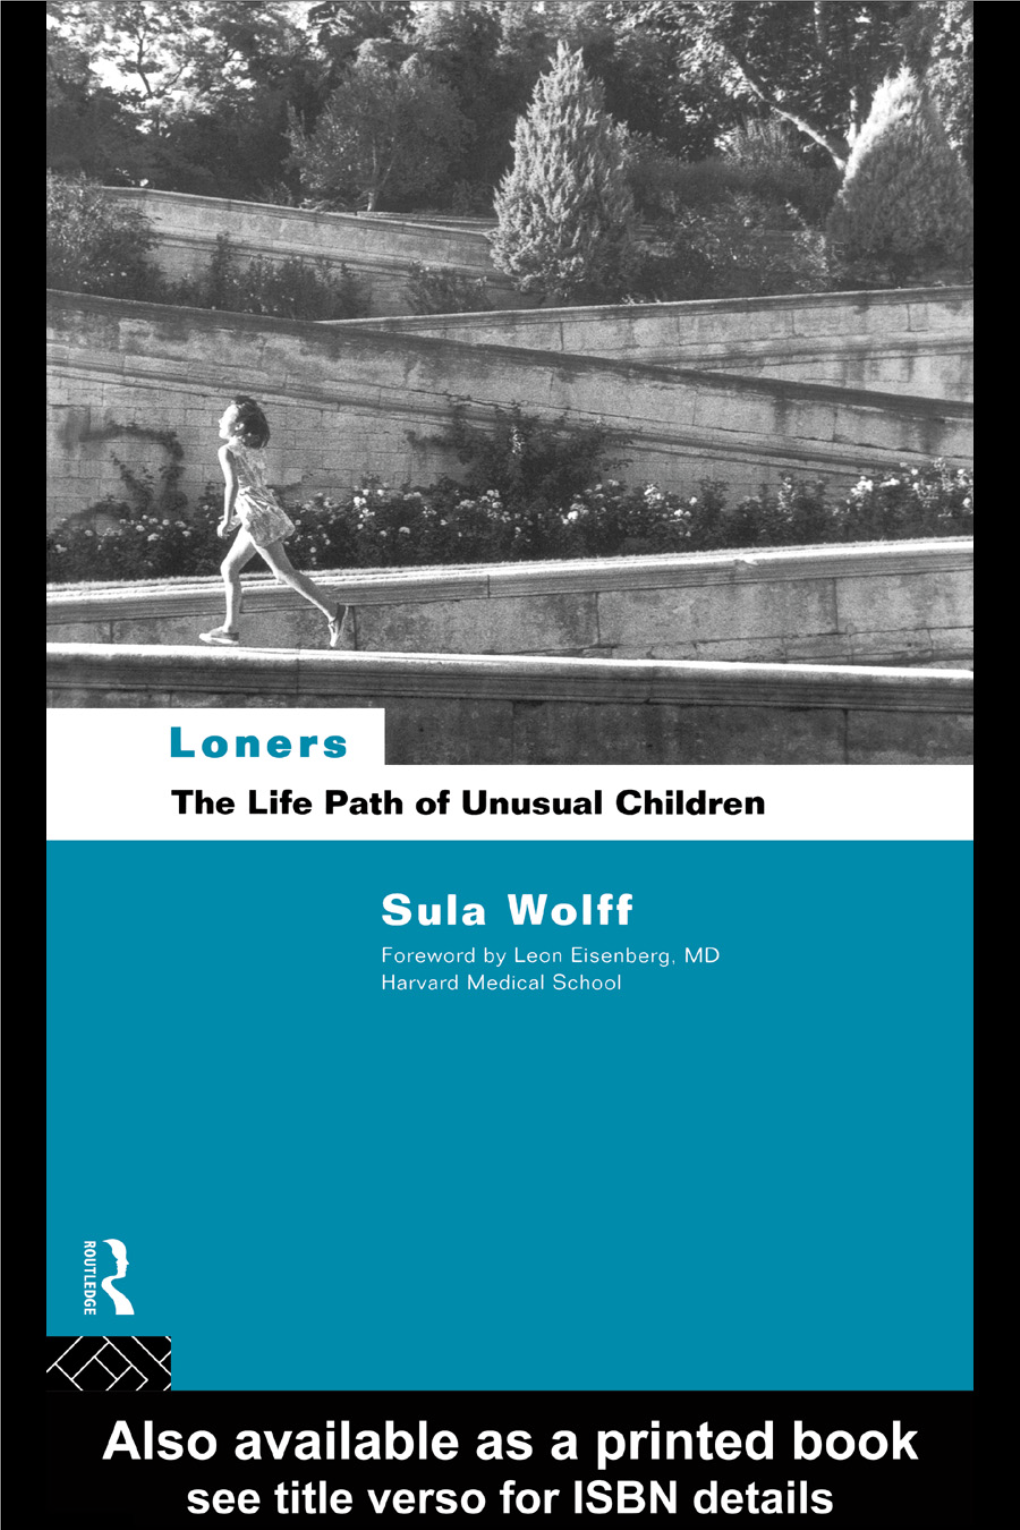 Loners: the Life Path of Unusual Children